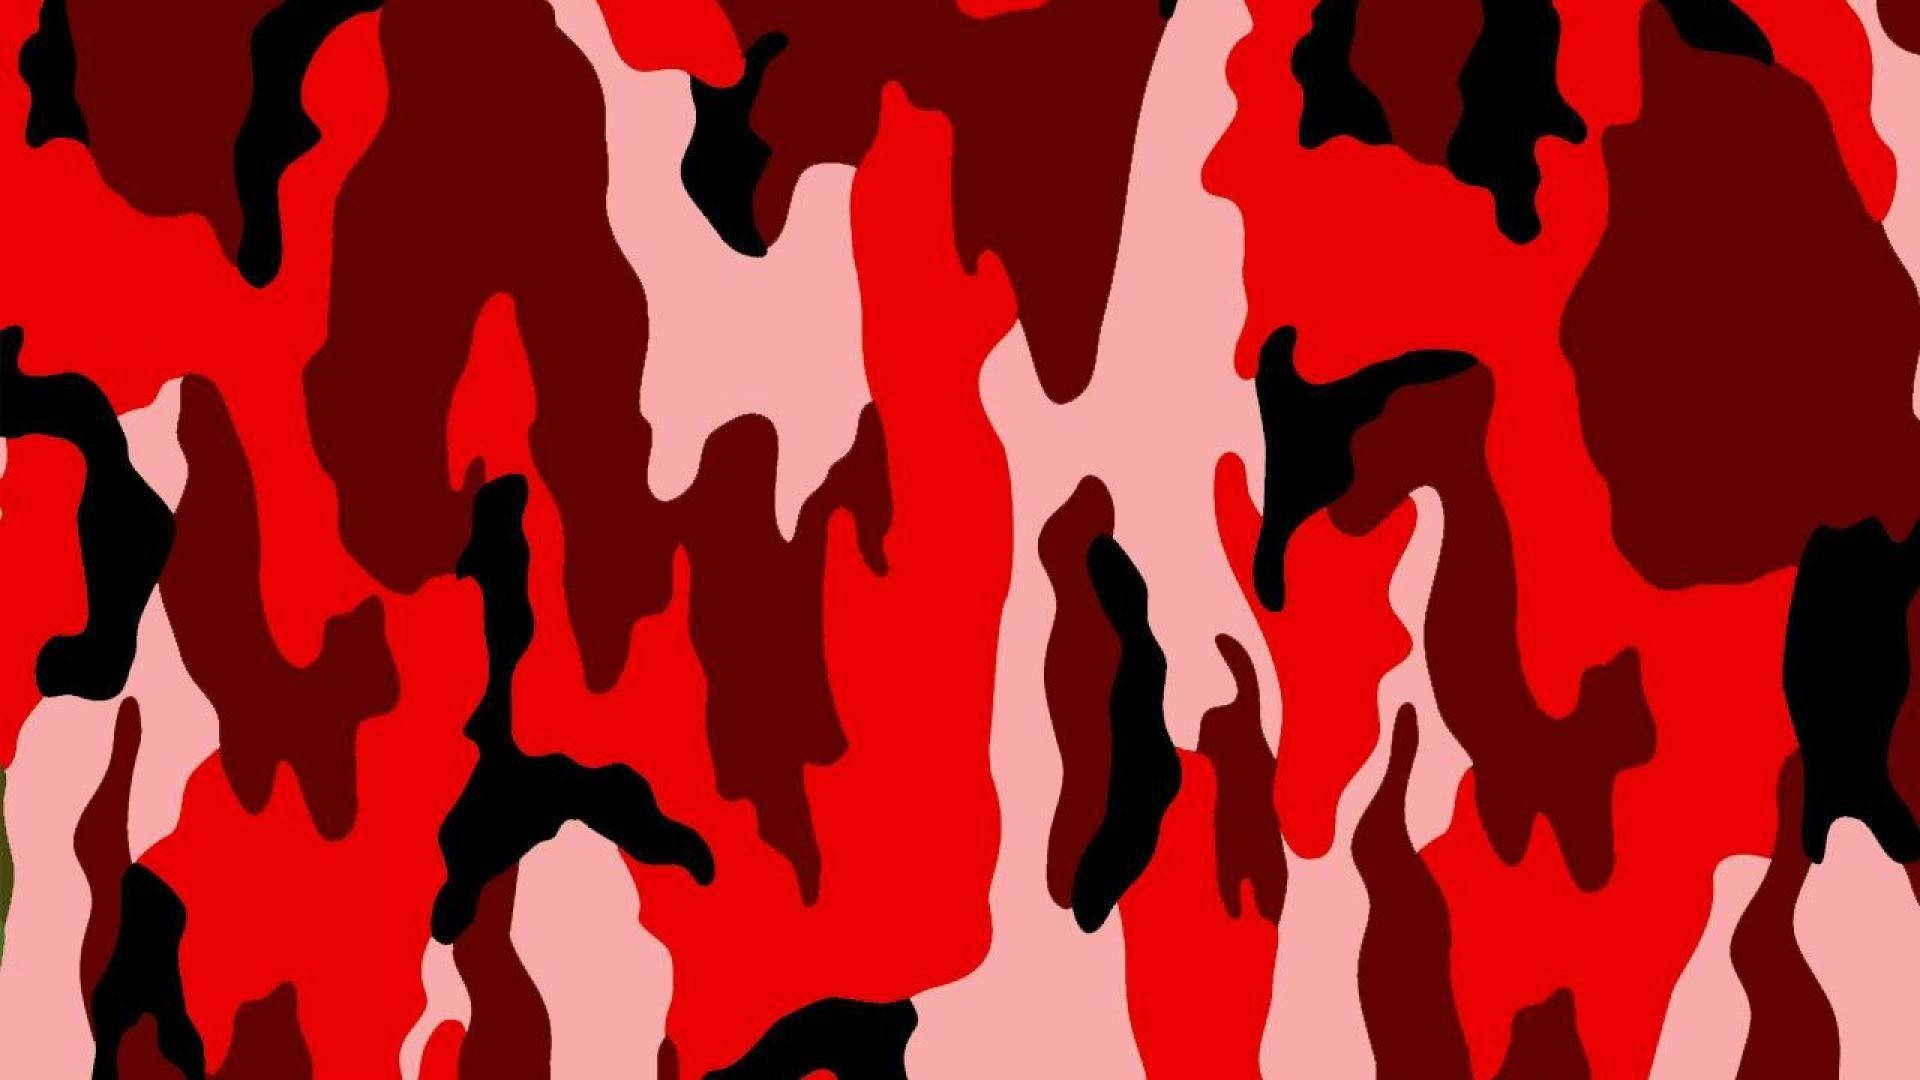 Army Camouflage in Red Wallpaper